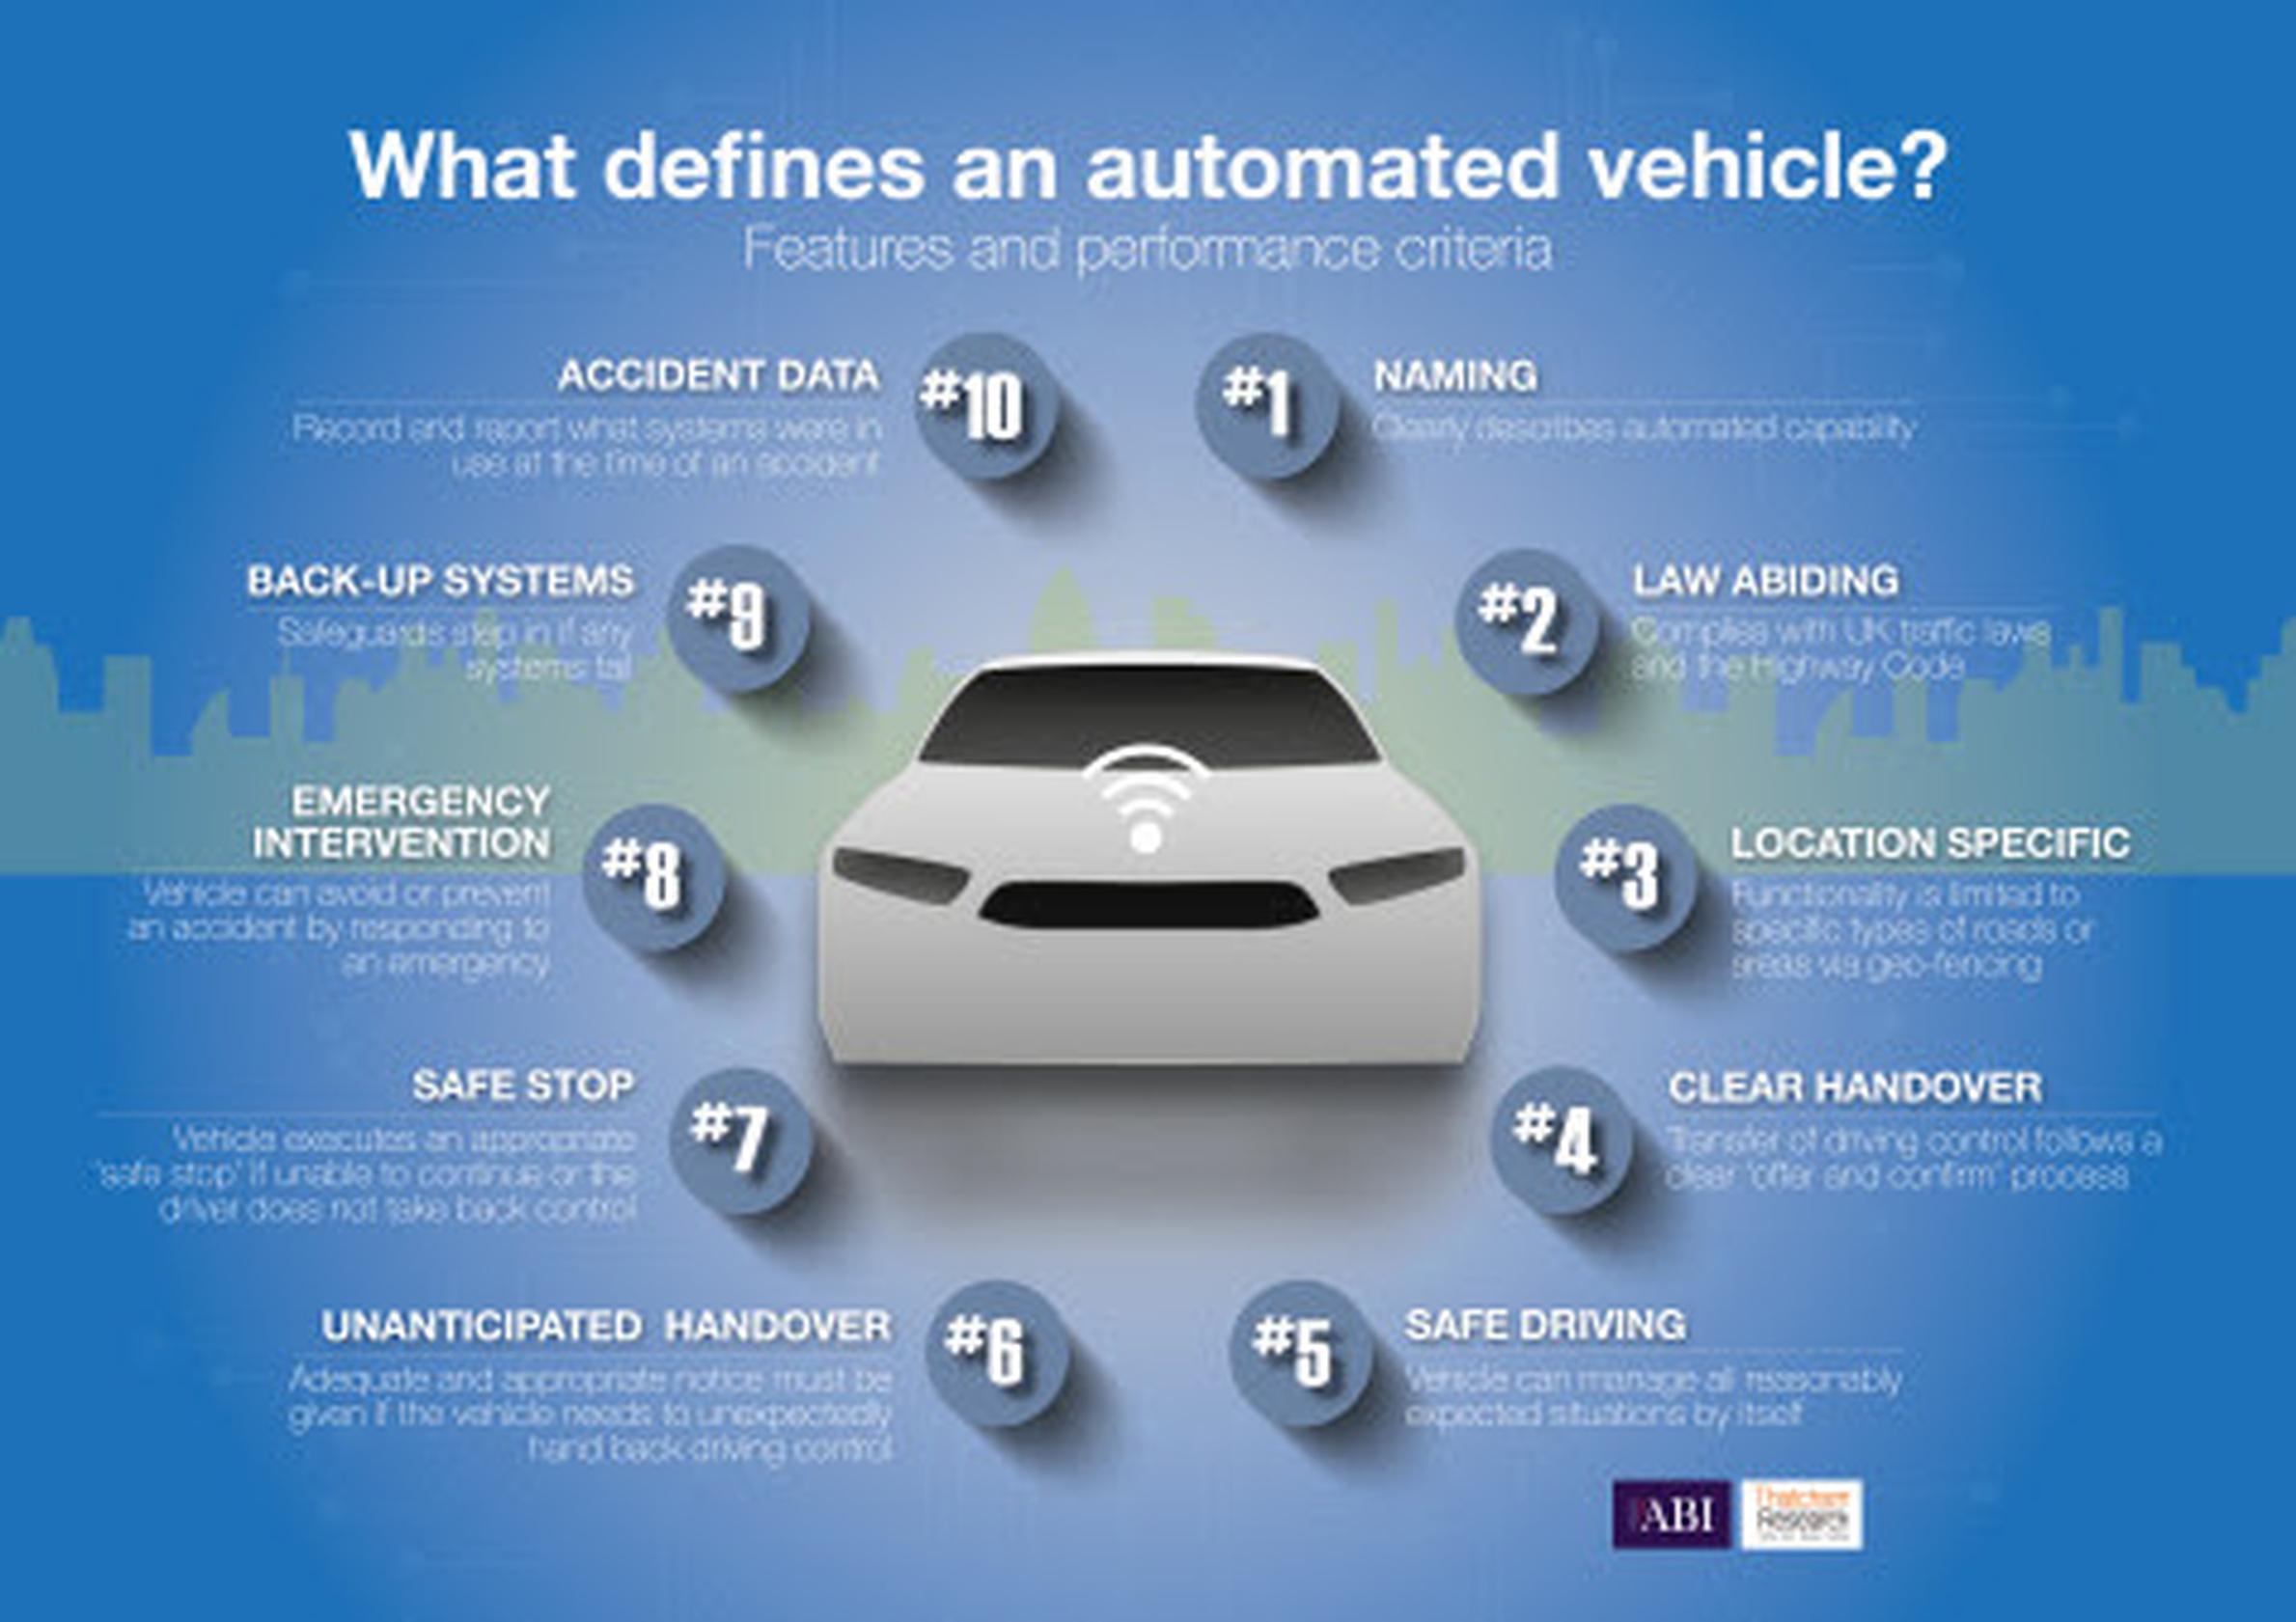 The 10 key features and performance criteria required of a truly automated vehicle